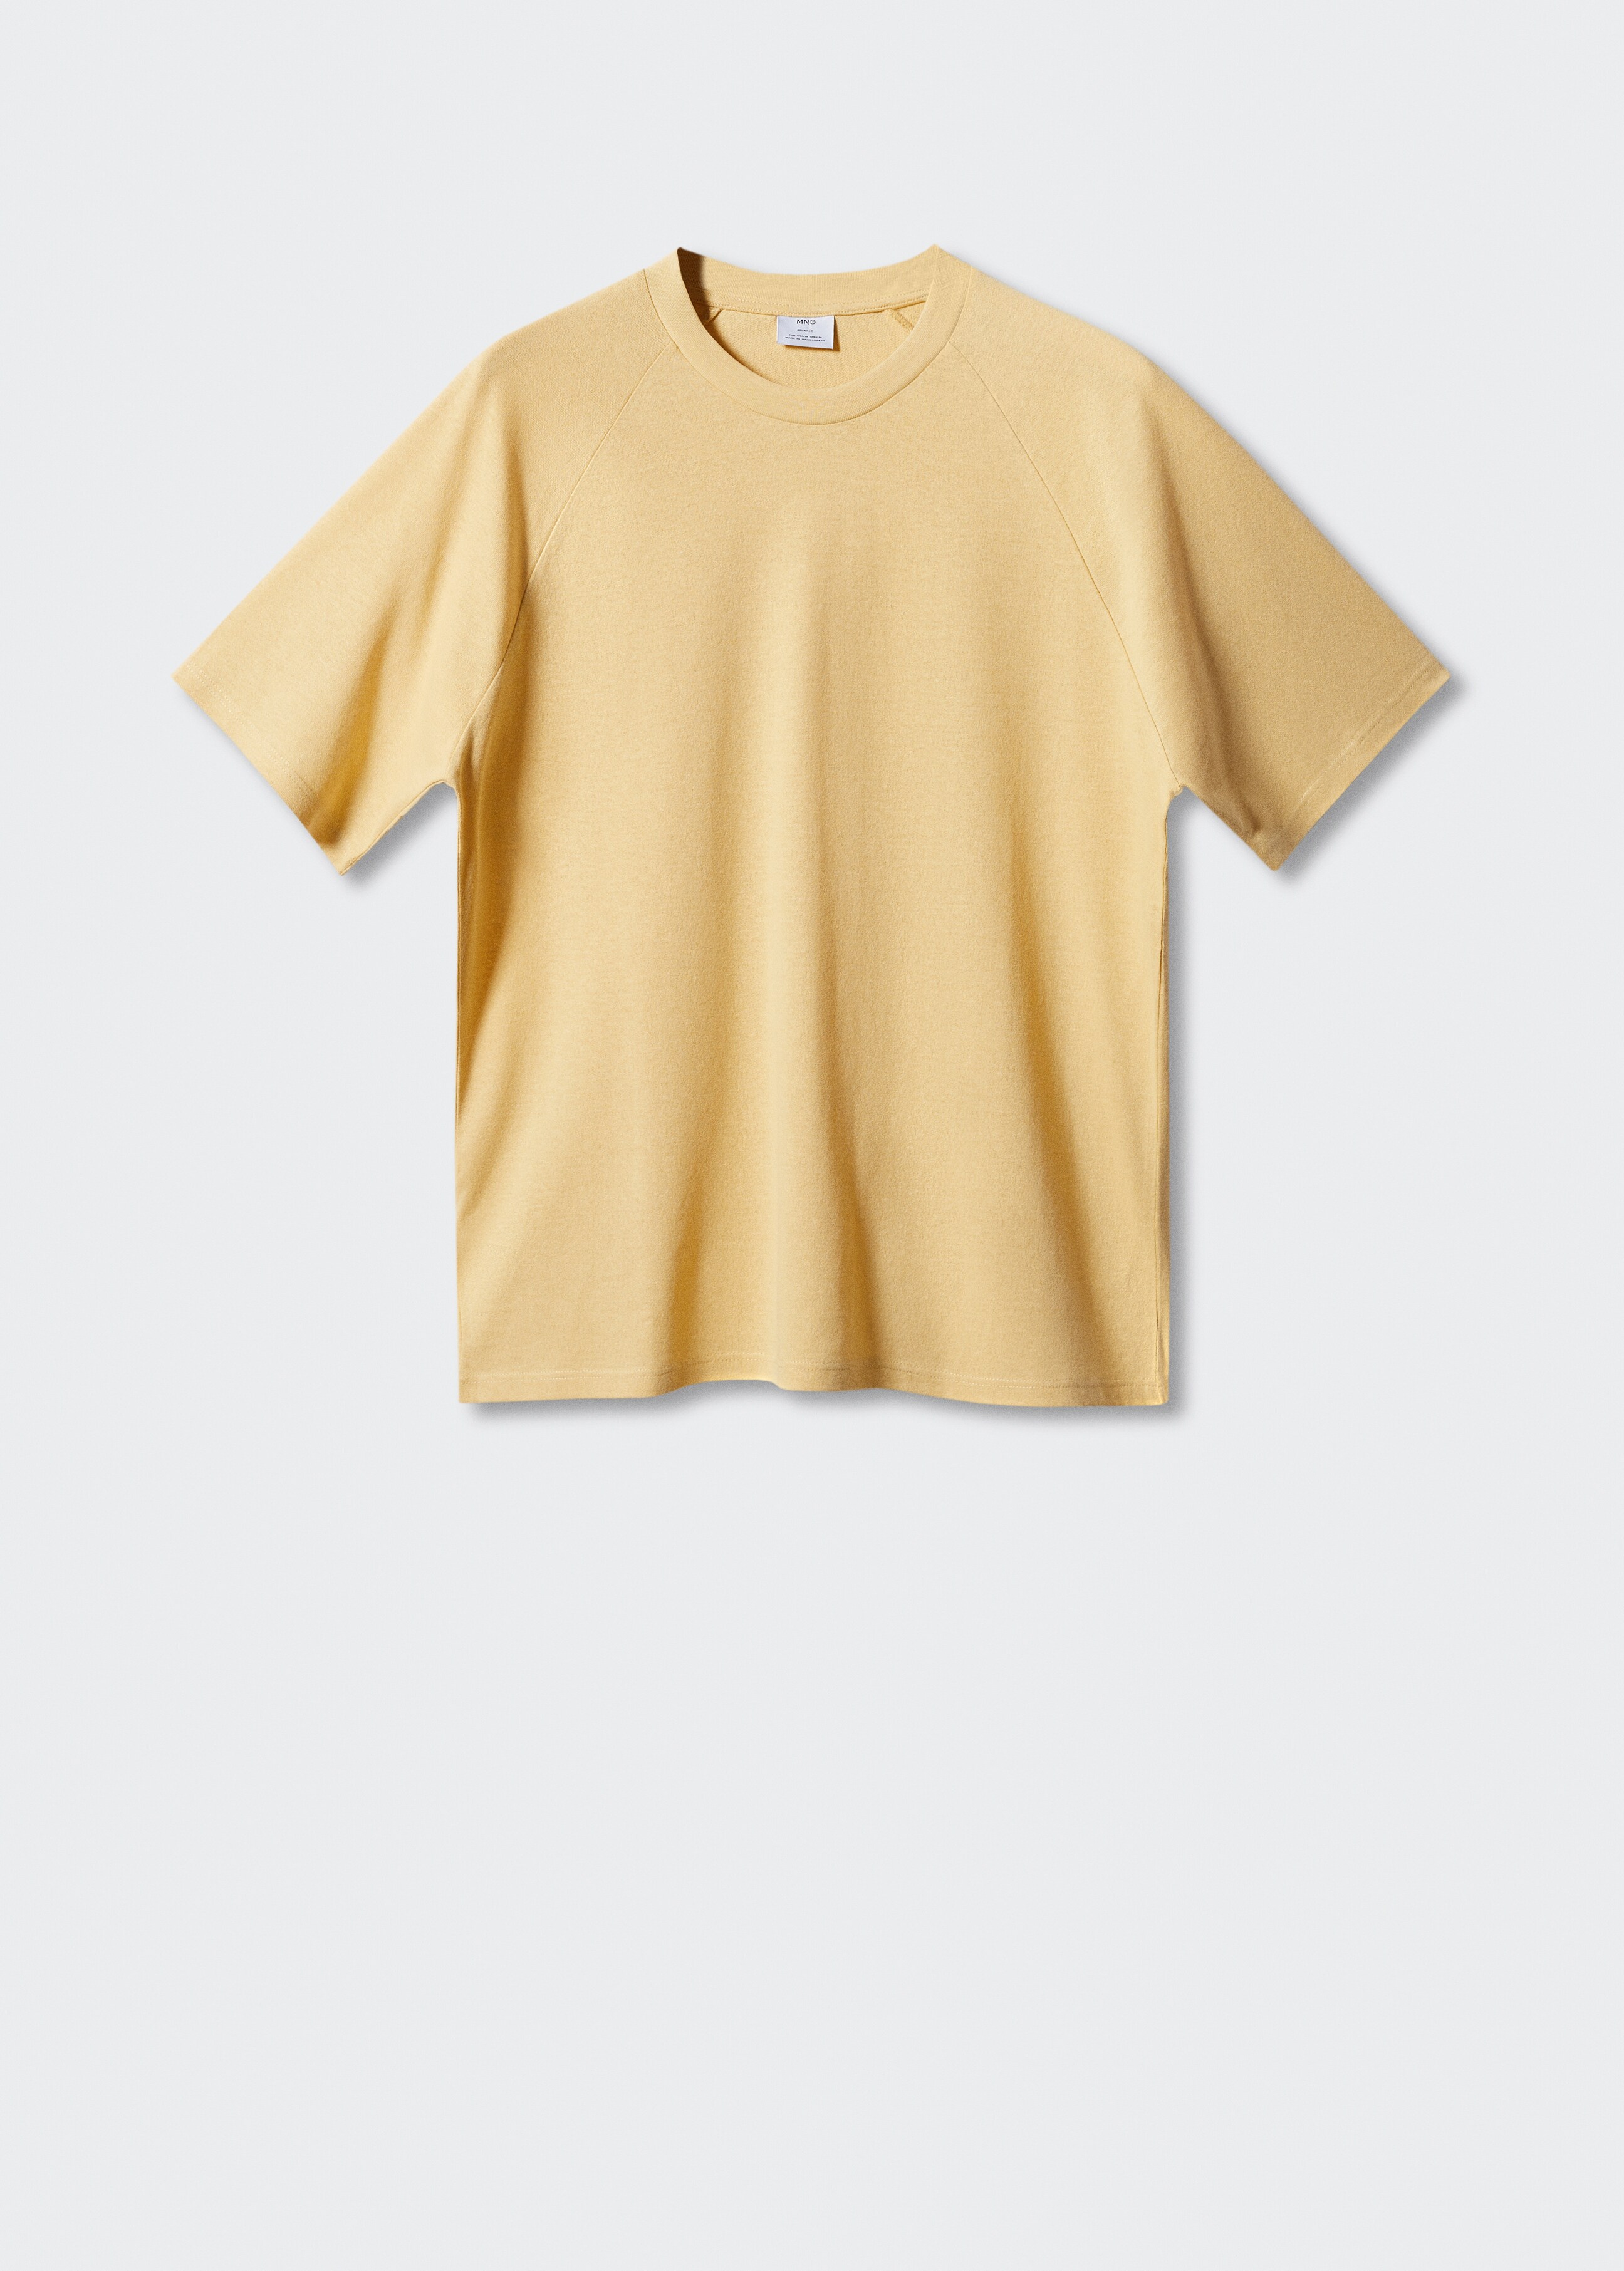 Textured cotton-linen t-shirt - Article without model